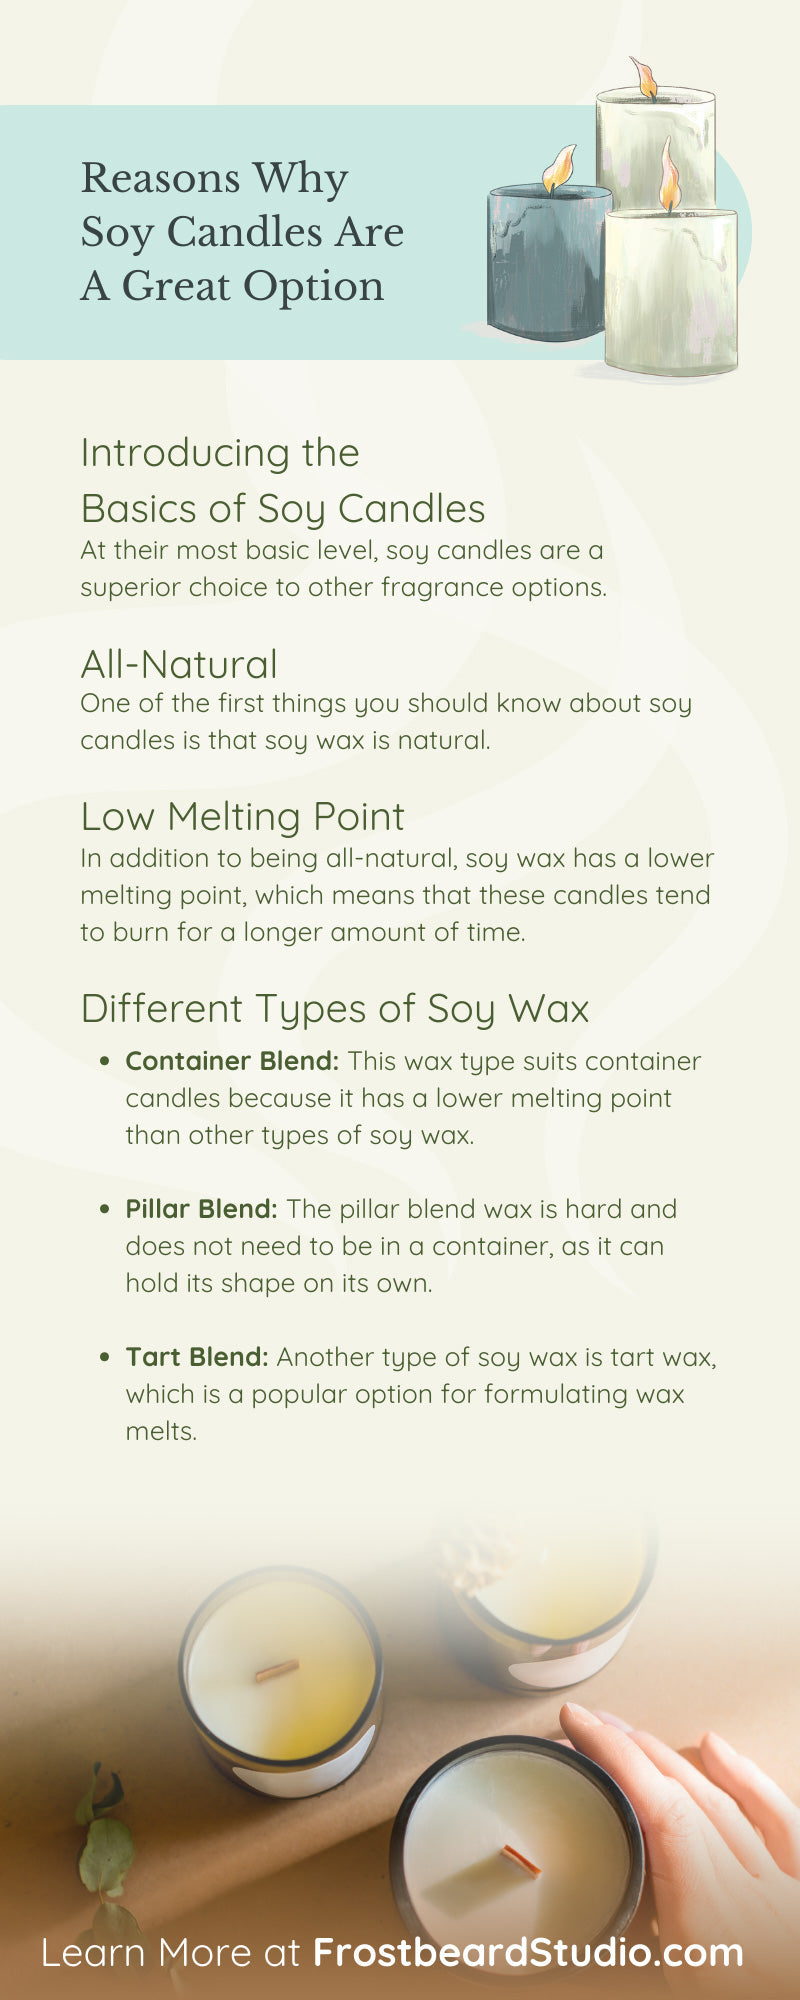 Reasons Why Soy Candles Are a Great Option